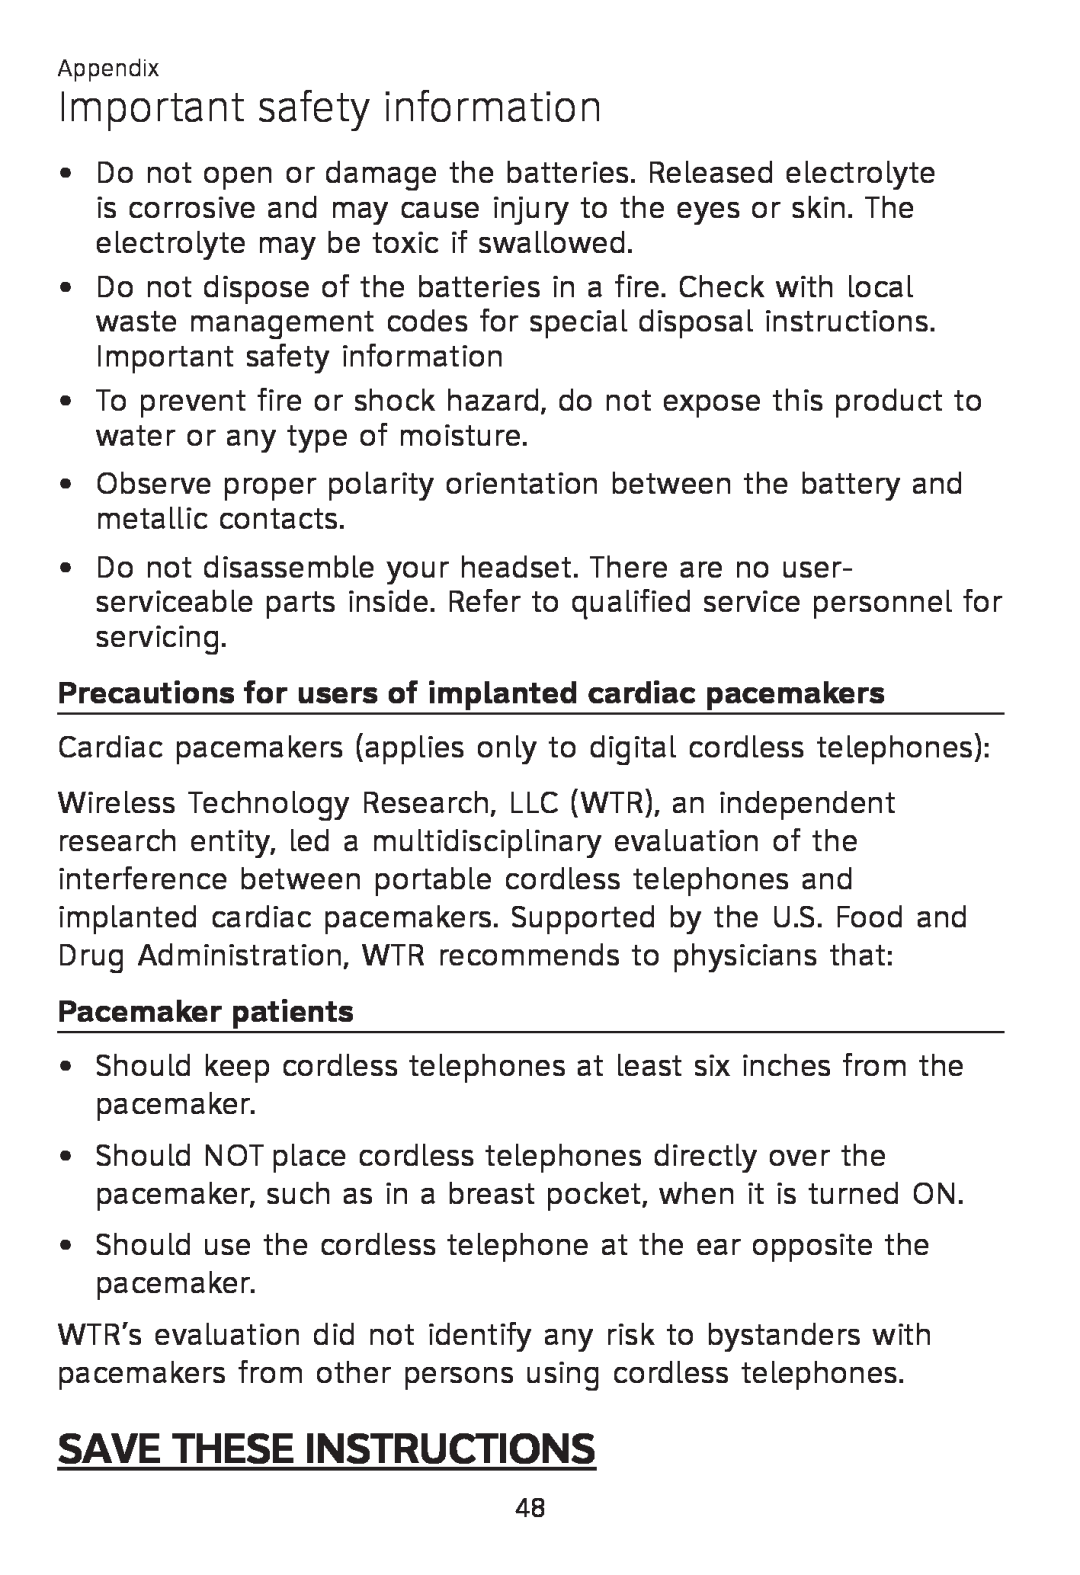 AT&T TL 7610 user manual Save These Instructions, Precautions for users of implanted cardiac pacemakers, Pacemaker patients 